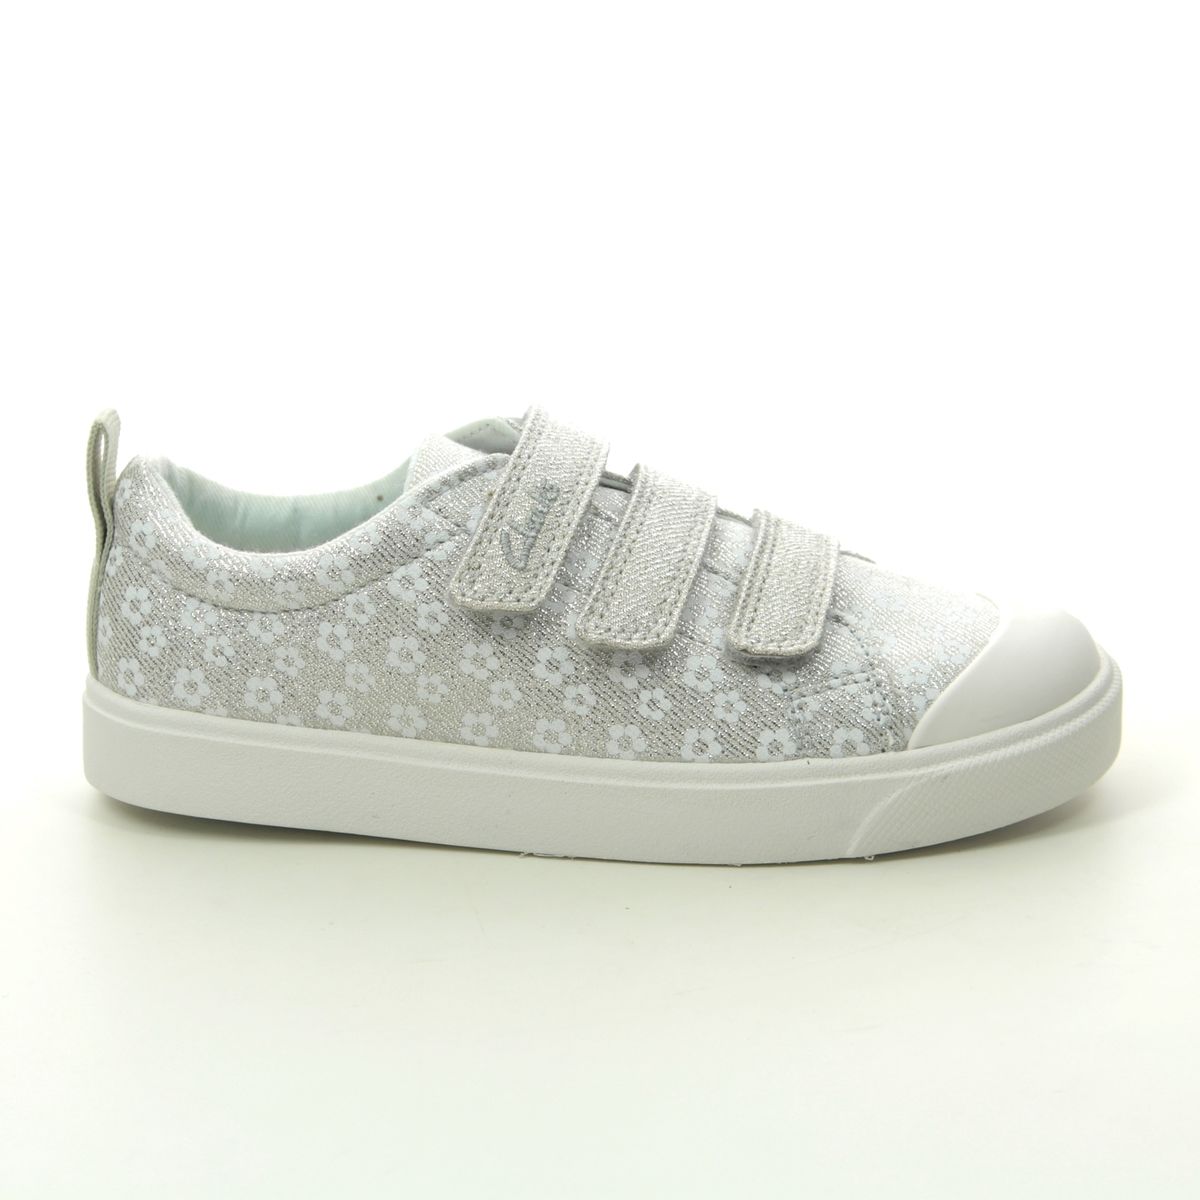 Clarks City Vibe K Silver Kids girls trainers 4910-97G